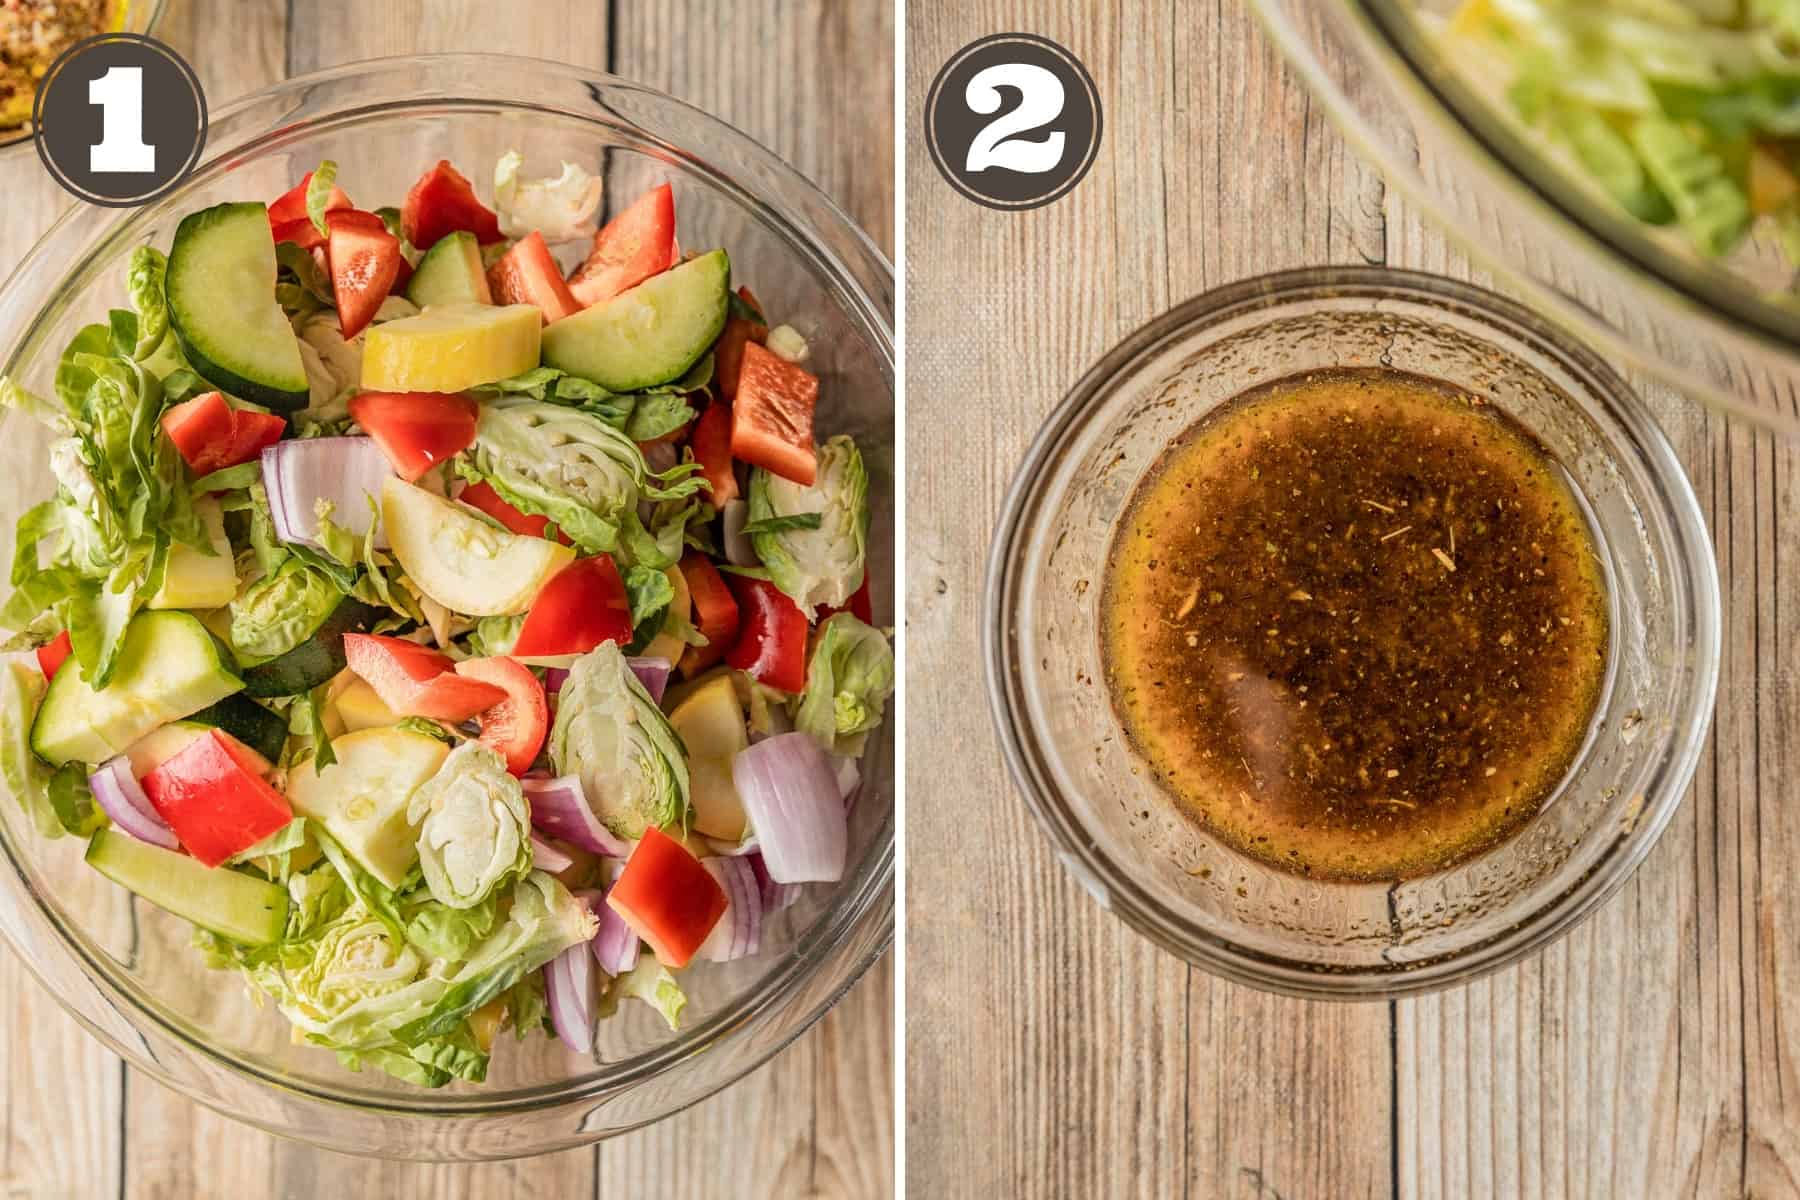 Side by side photos showing mixed veggies in a glass bowl and marinade ingredients being mixed in a small bowl.